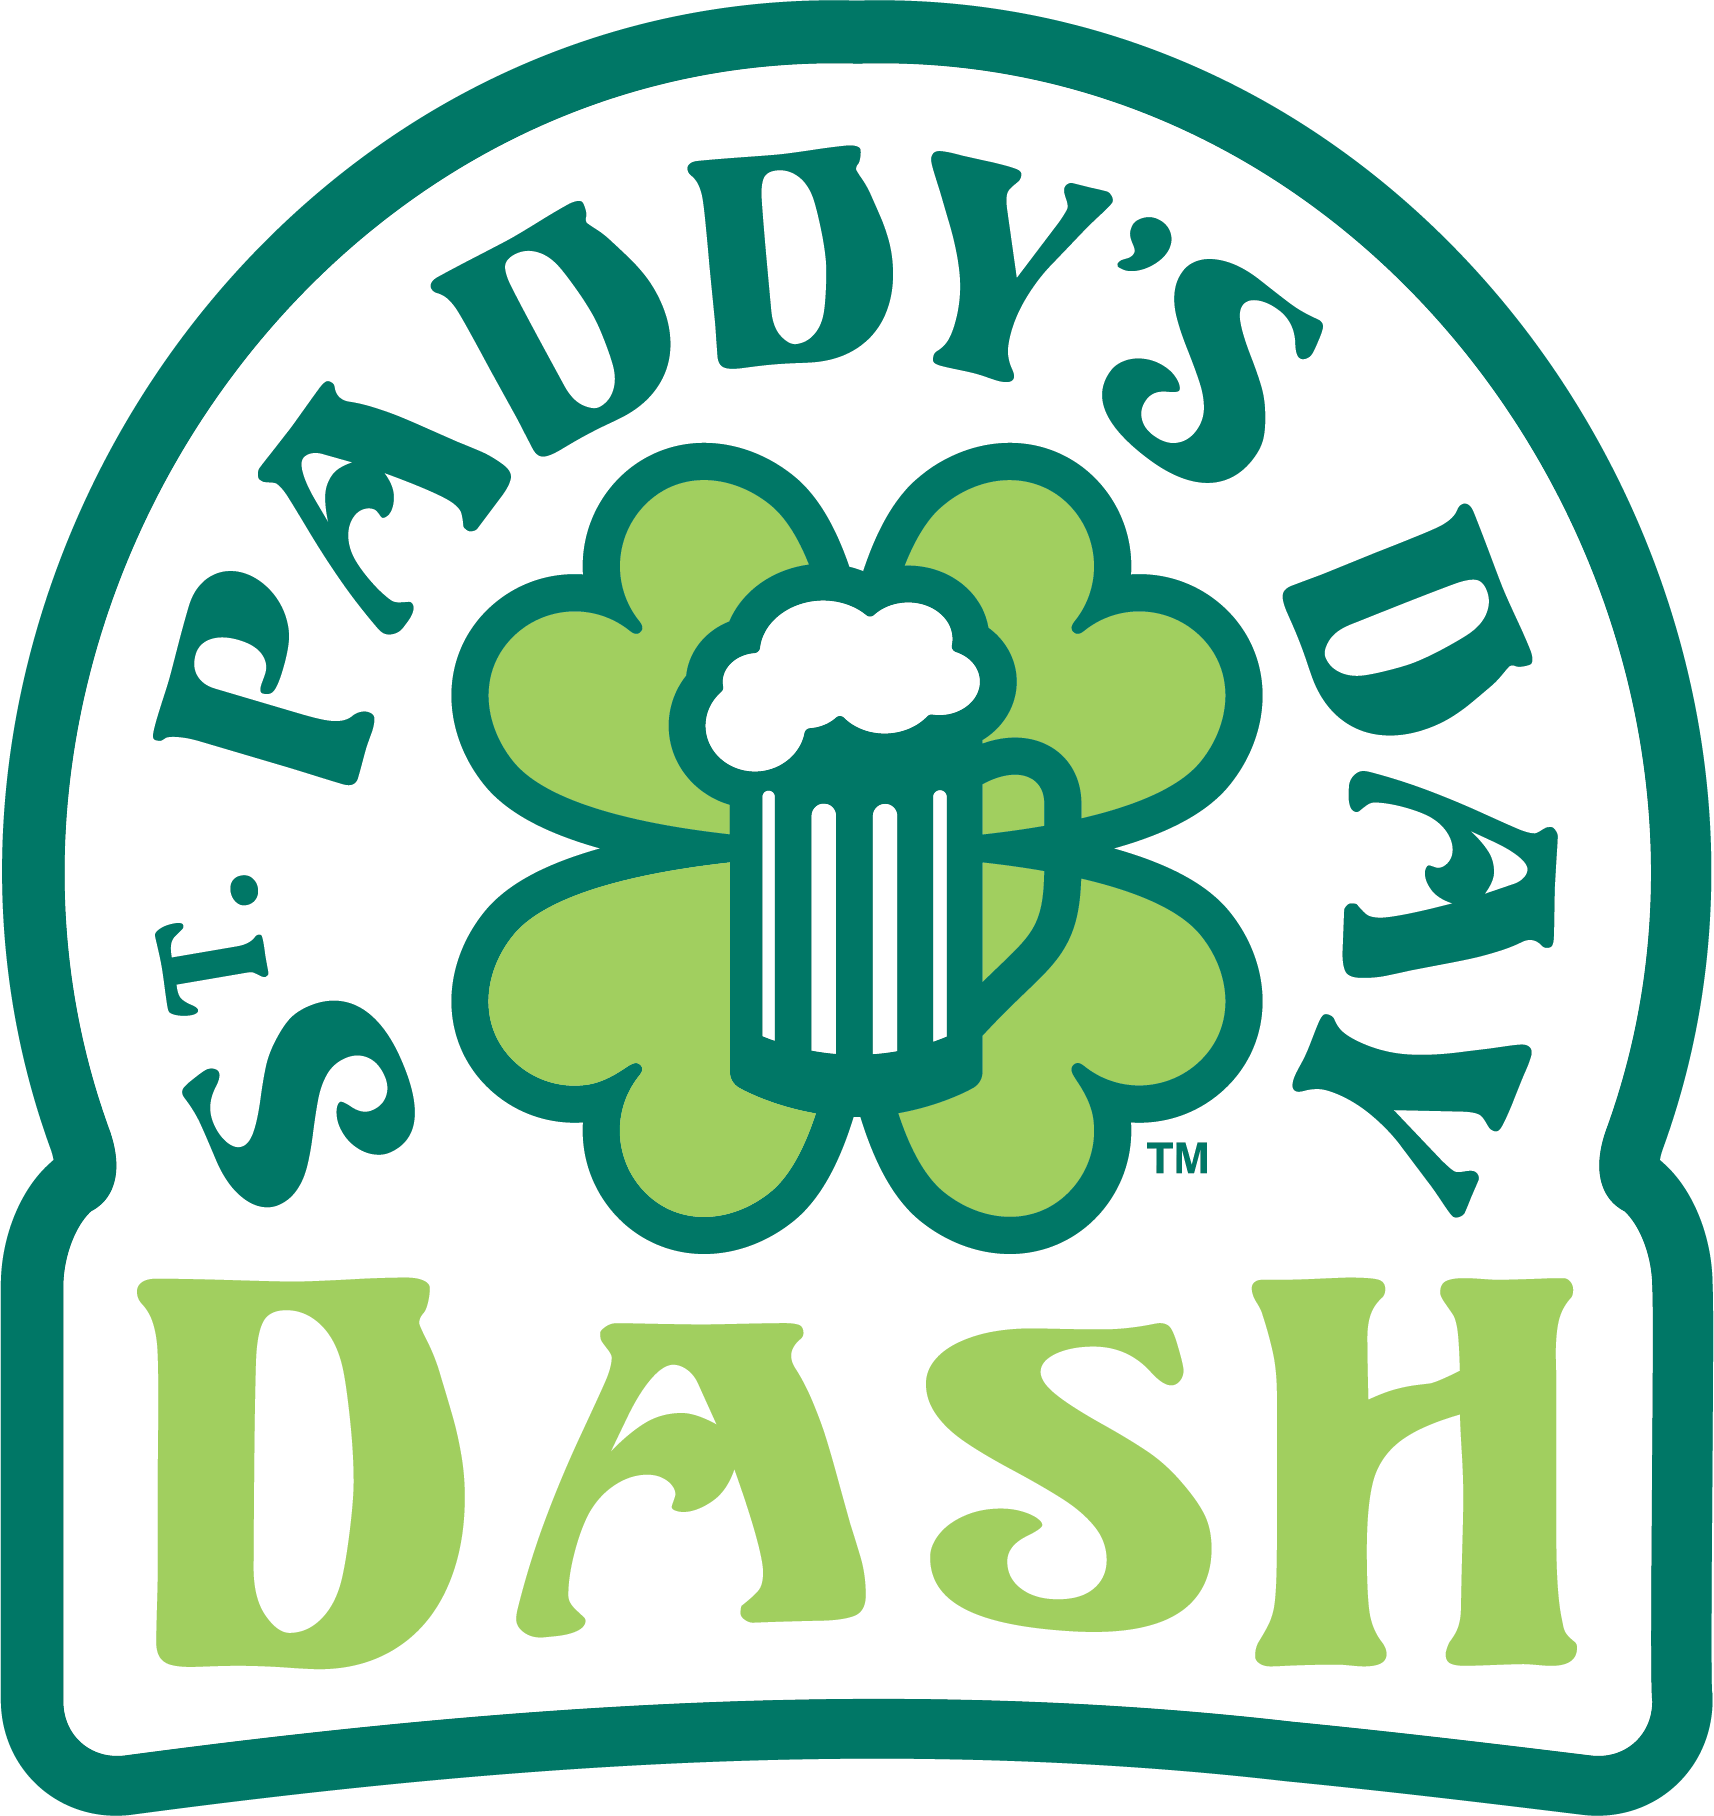 St. Paddy's Day Dash Down Greenville